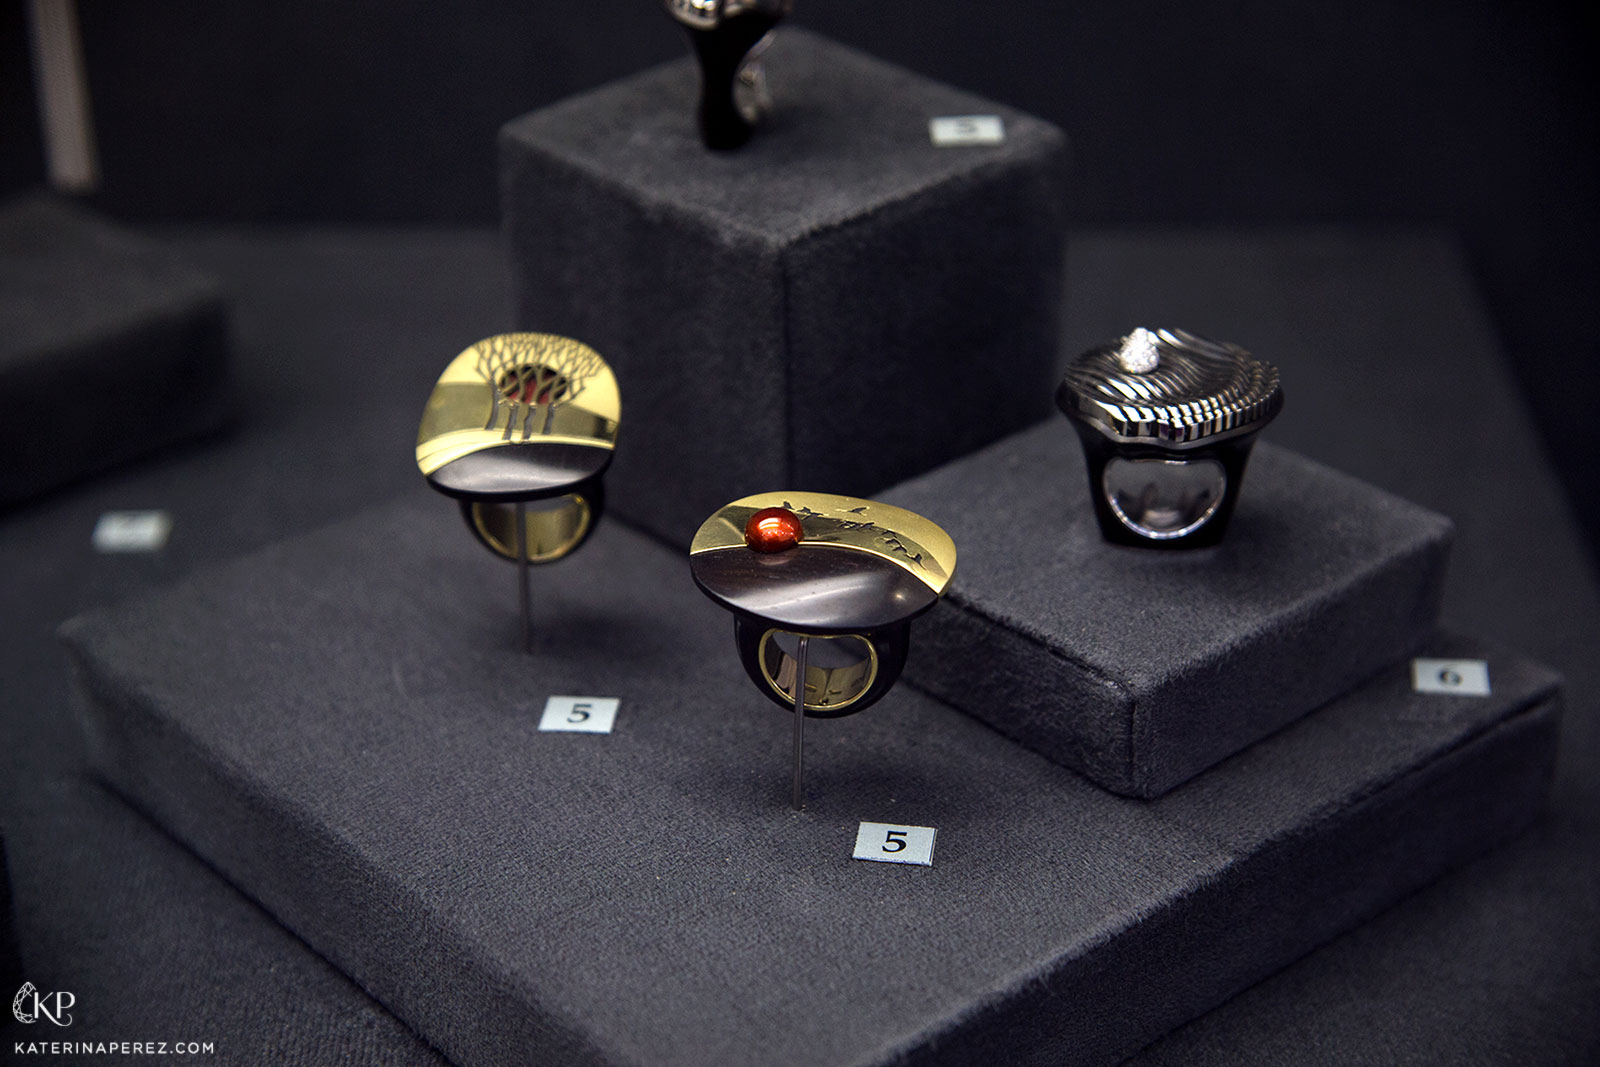 Rings created at 'Russian crafts' centre in Yaroslavl